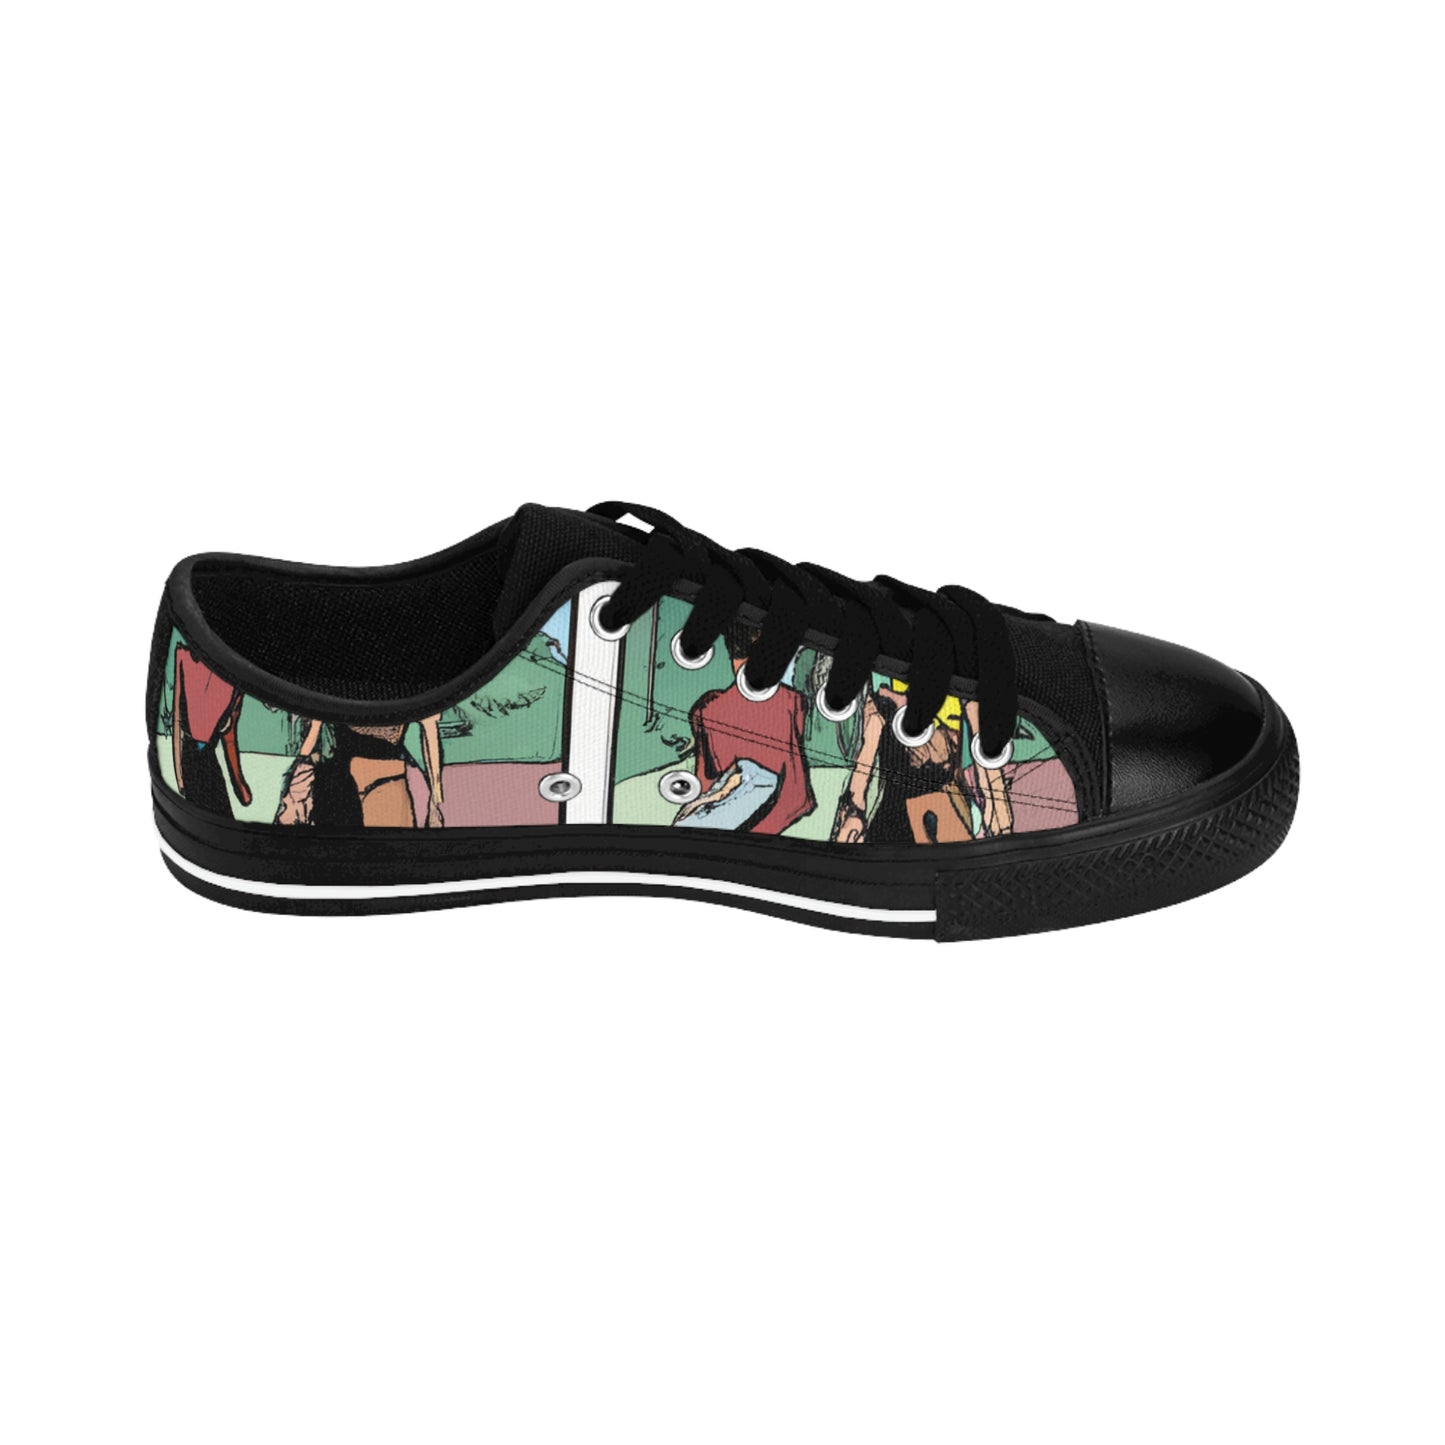 .

Rotholfo the Shoemaker - Comic Book Low Top